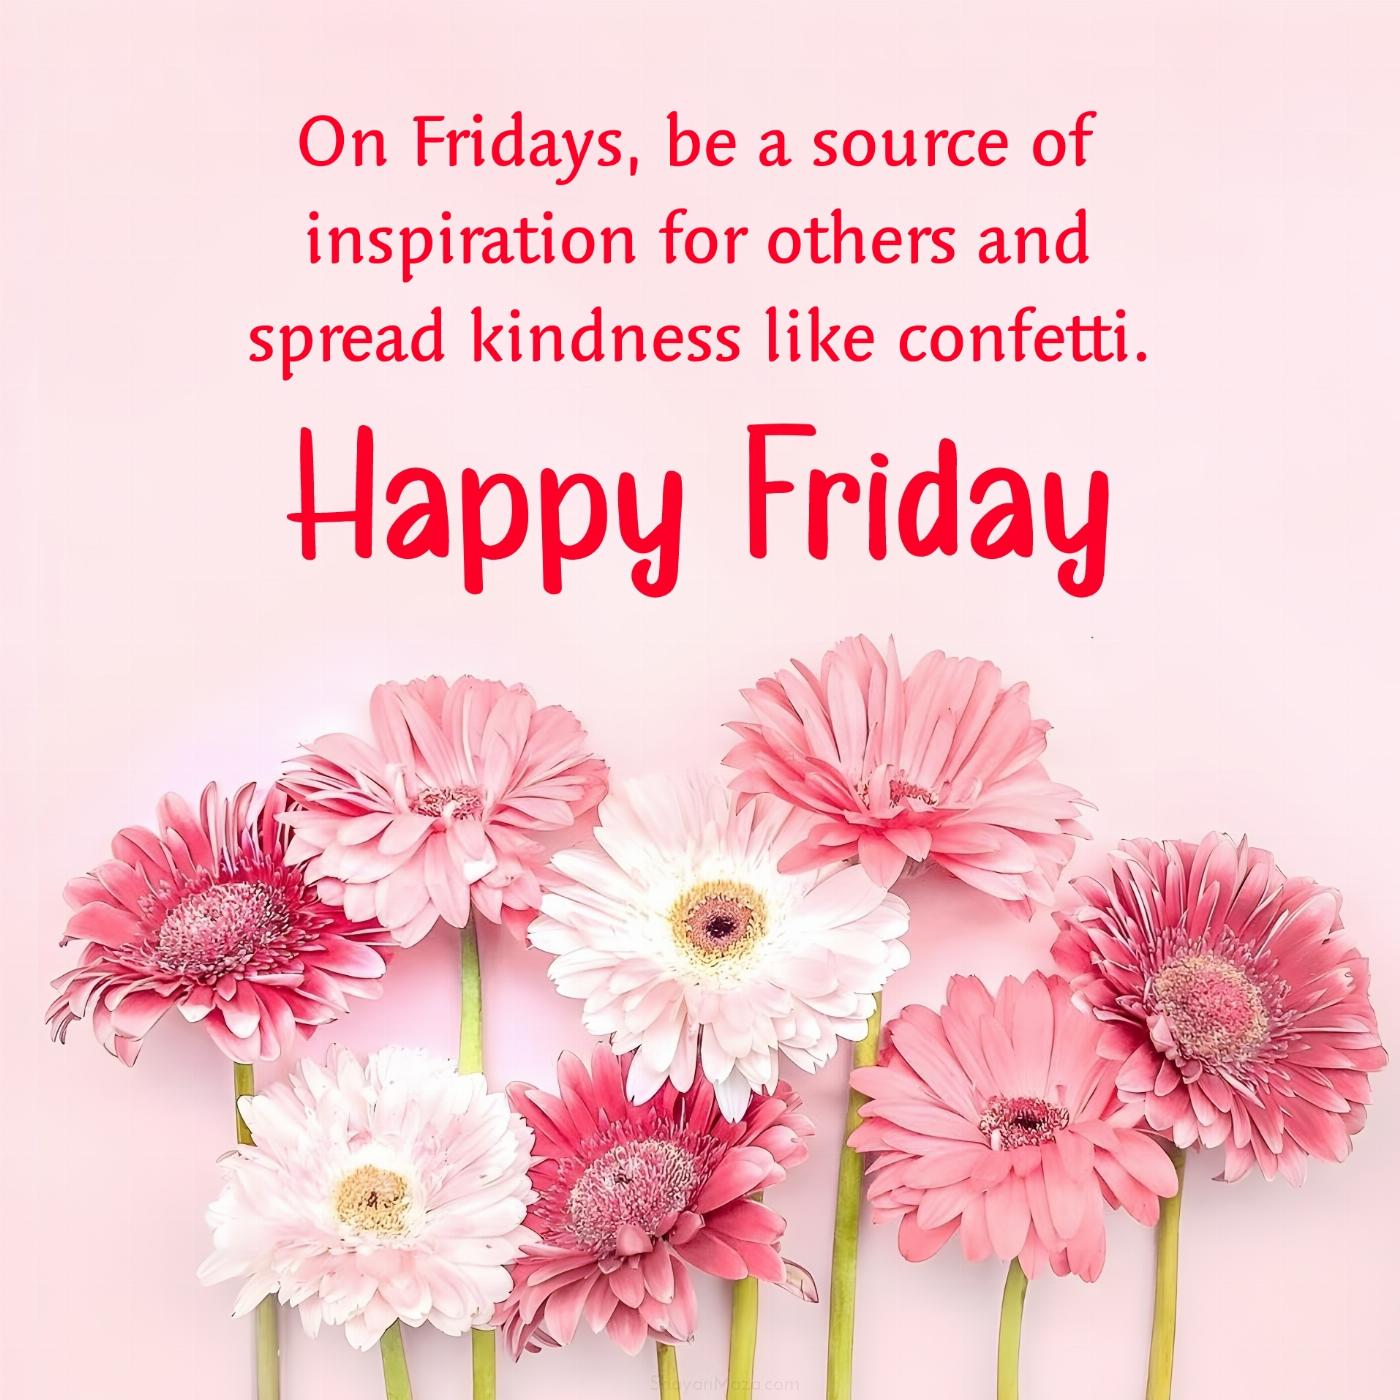 On Fridays be a source of inspiration for others and spread kindness like confetti